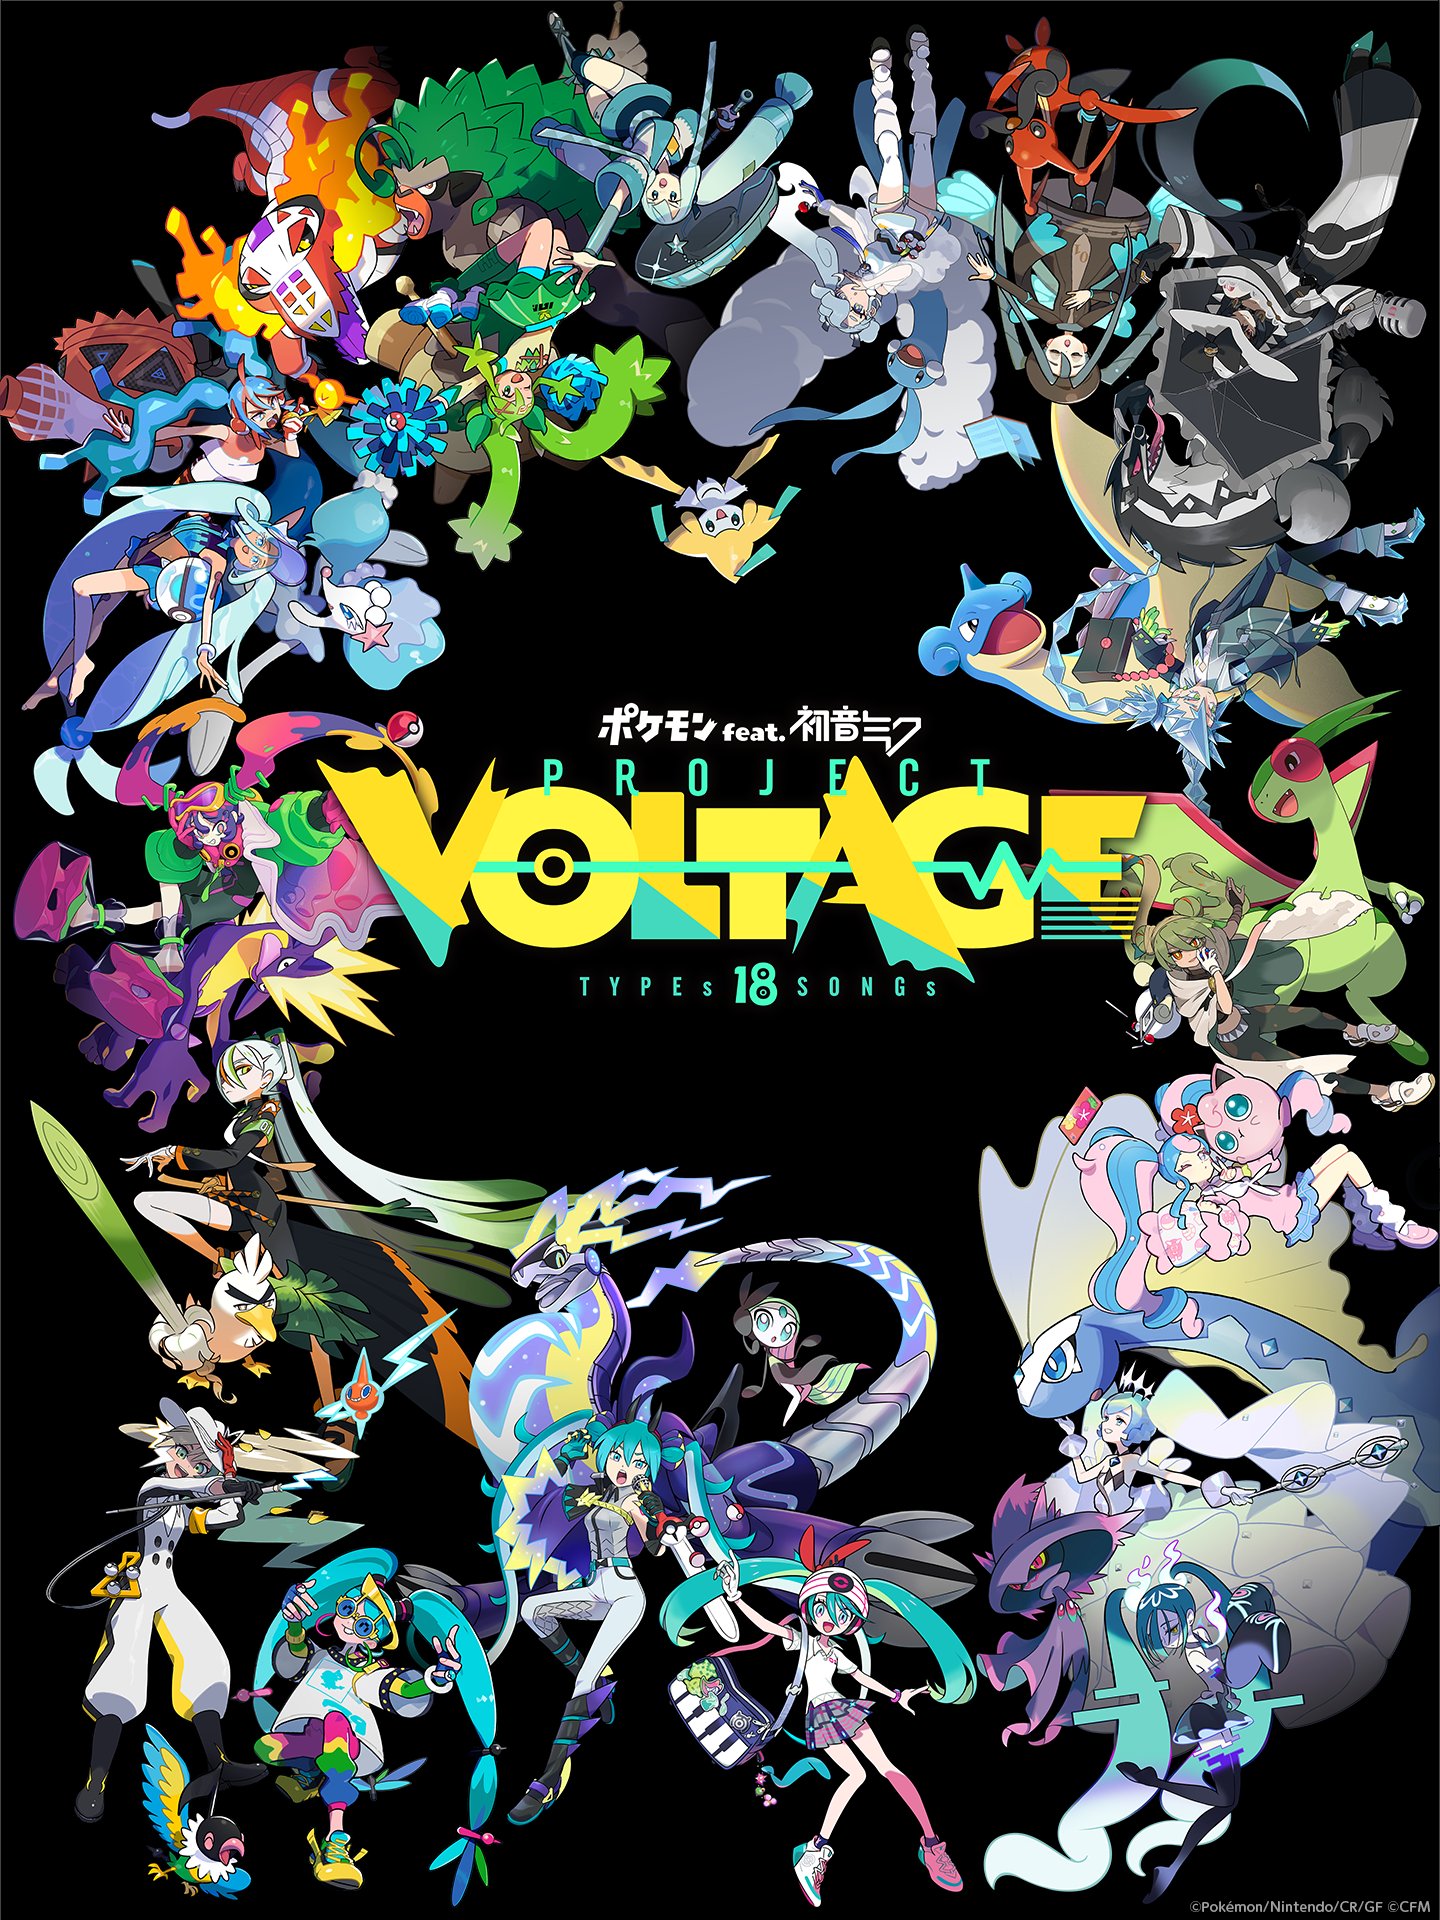 Offifical visual of Pokemon Feat. Hatsune Miku Project VOLTAGE